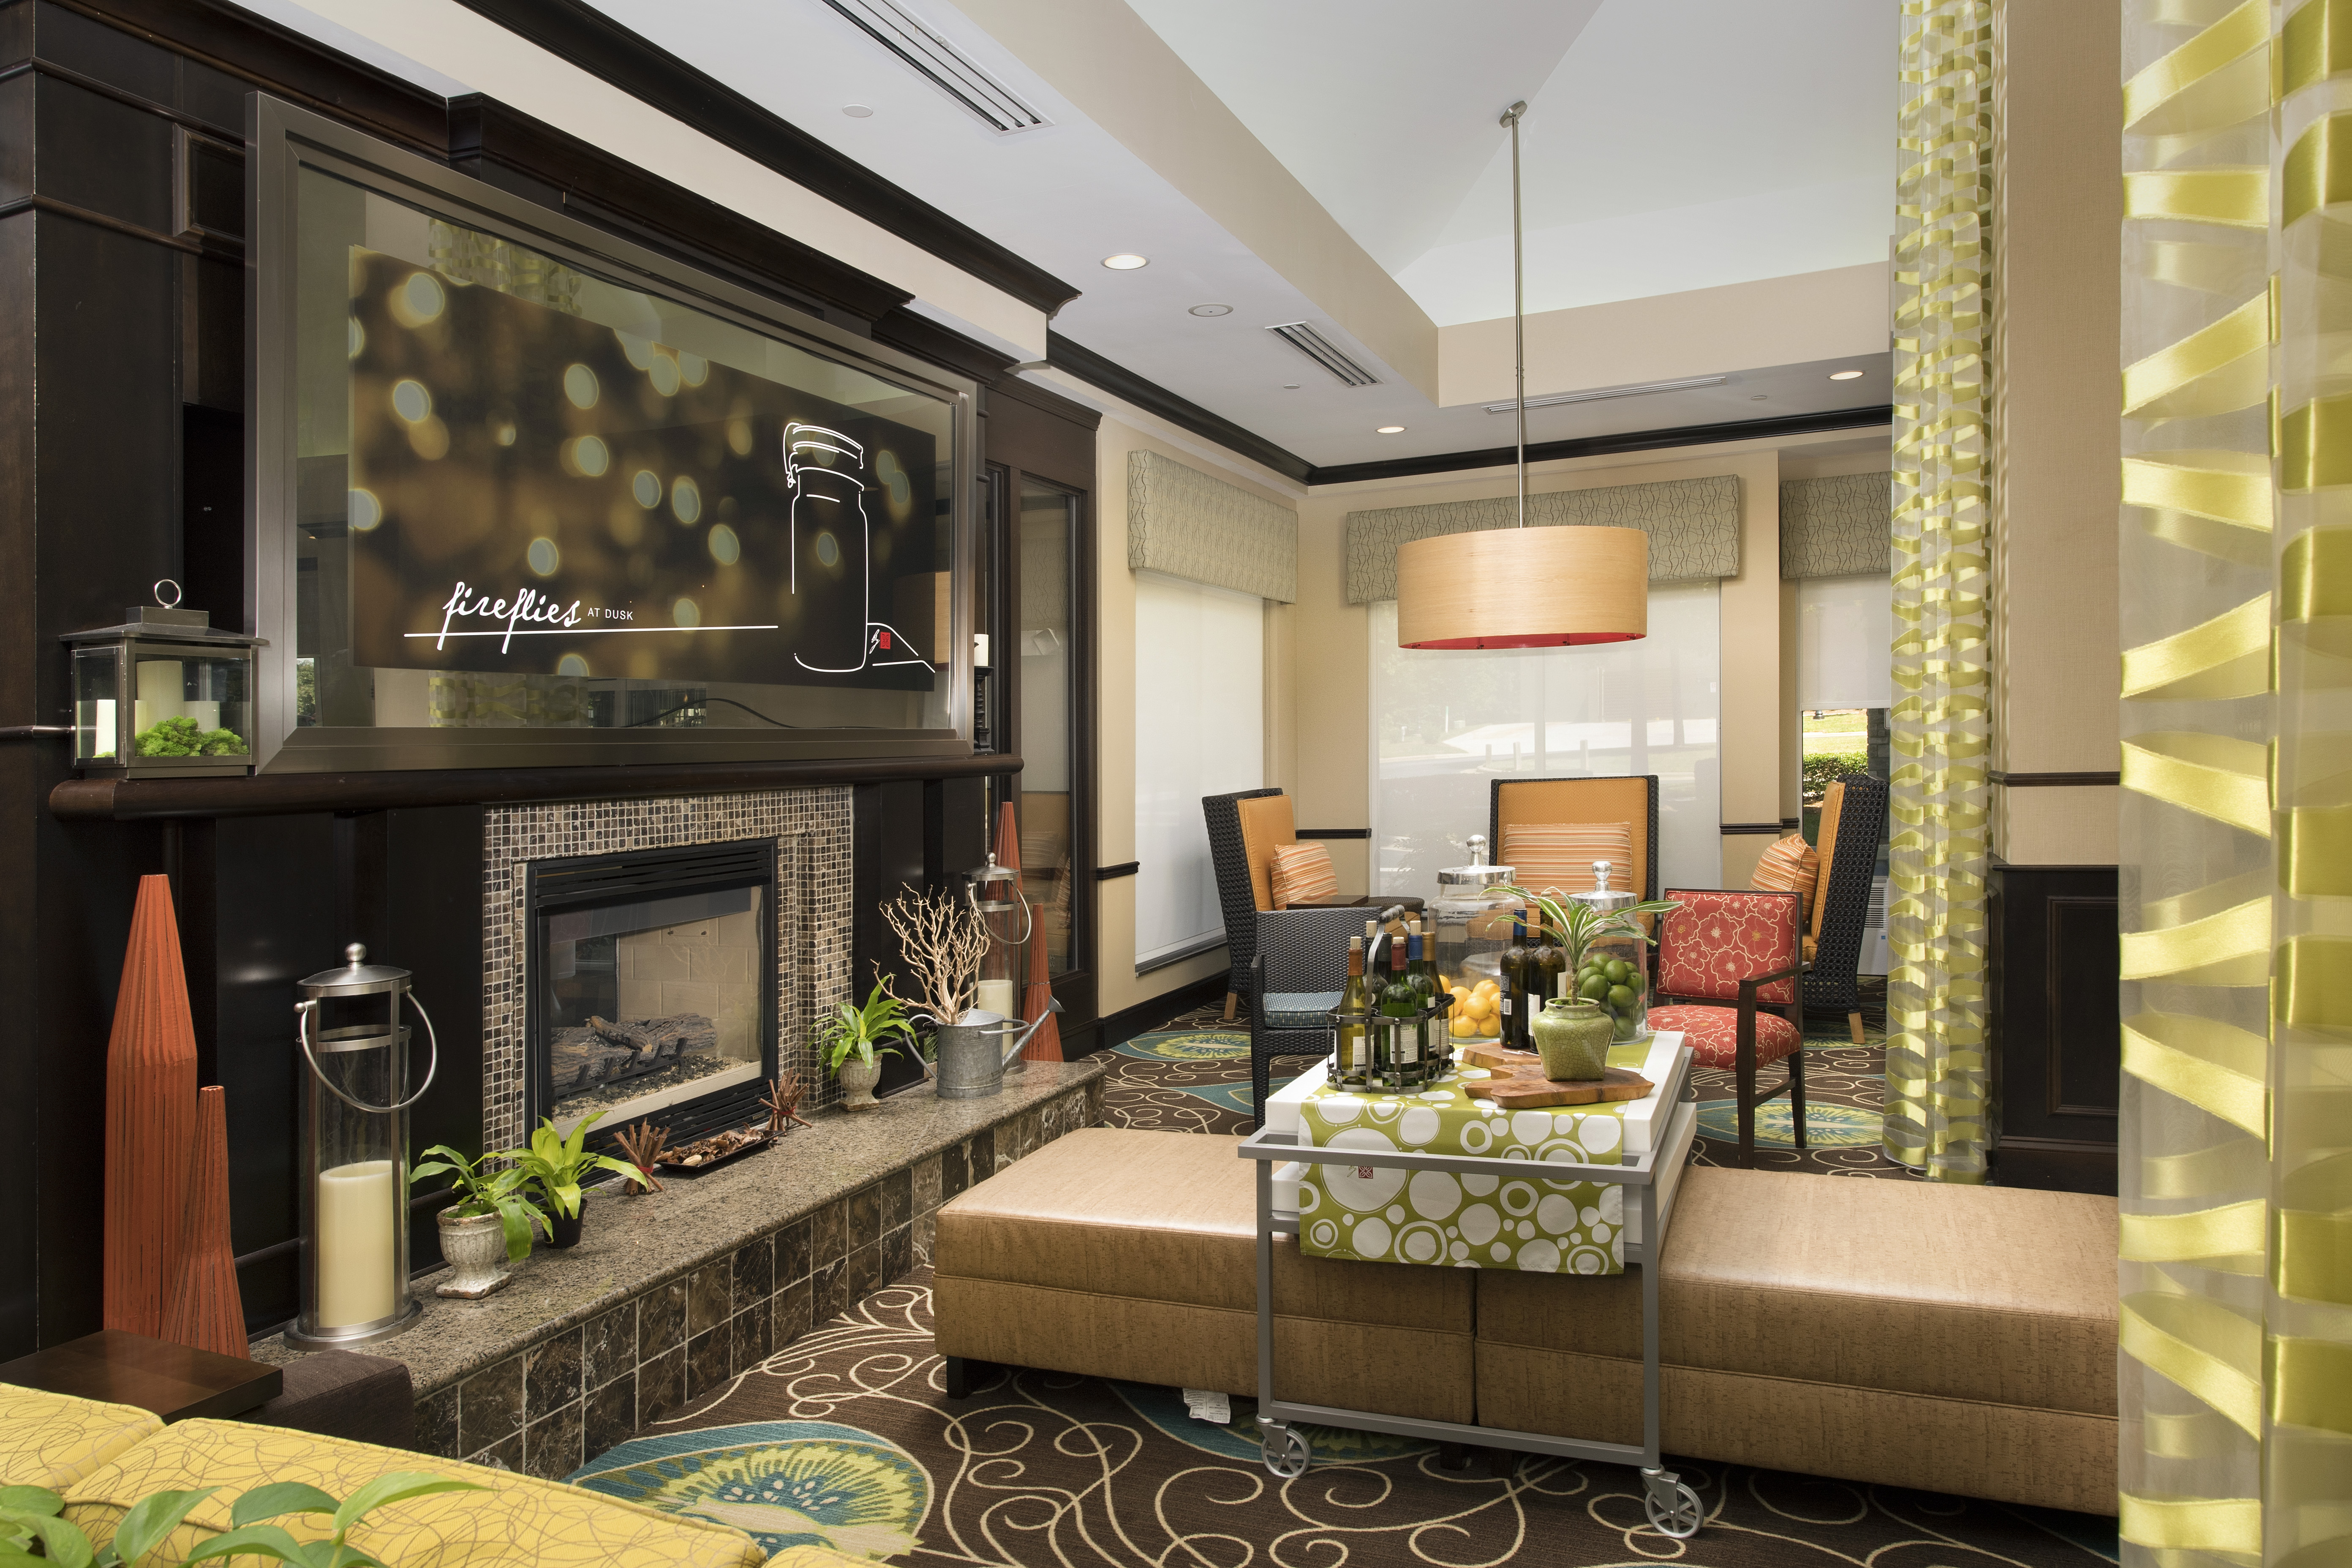 Lobby Seating Area With Long Drapes, Wall Art Above Fireplace, and Beverage Station